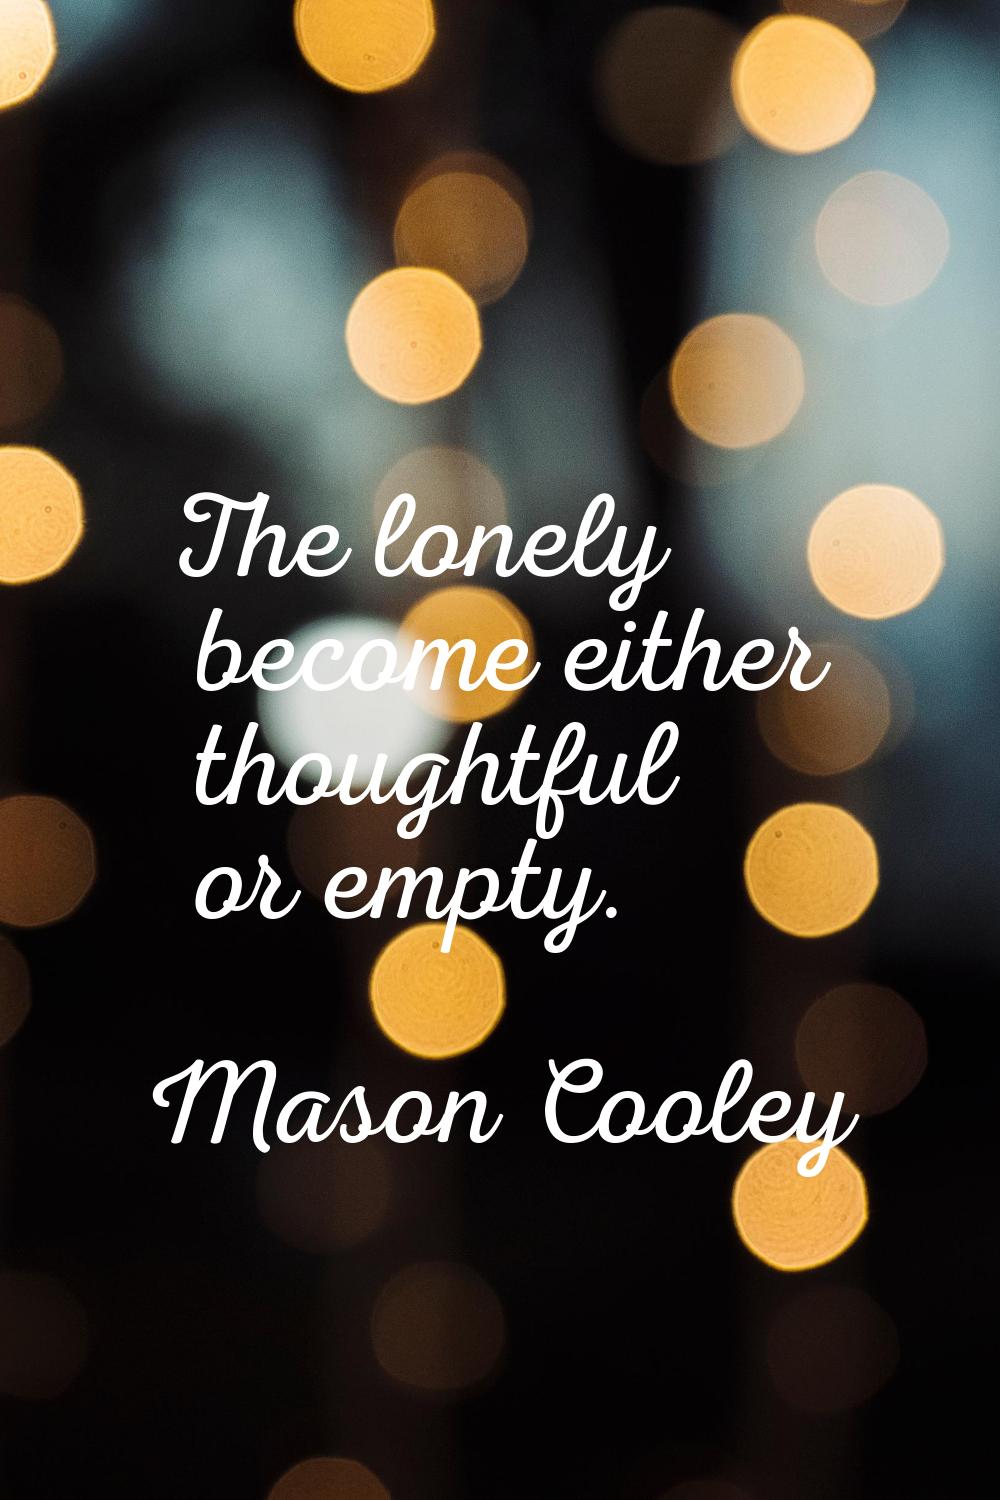 The lonely become either thoughtful or empty.